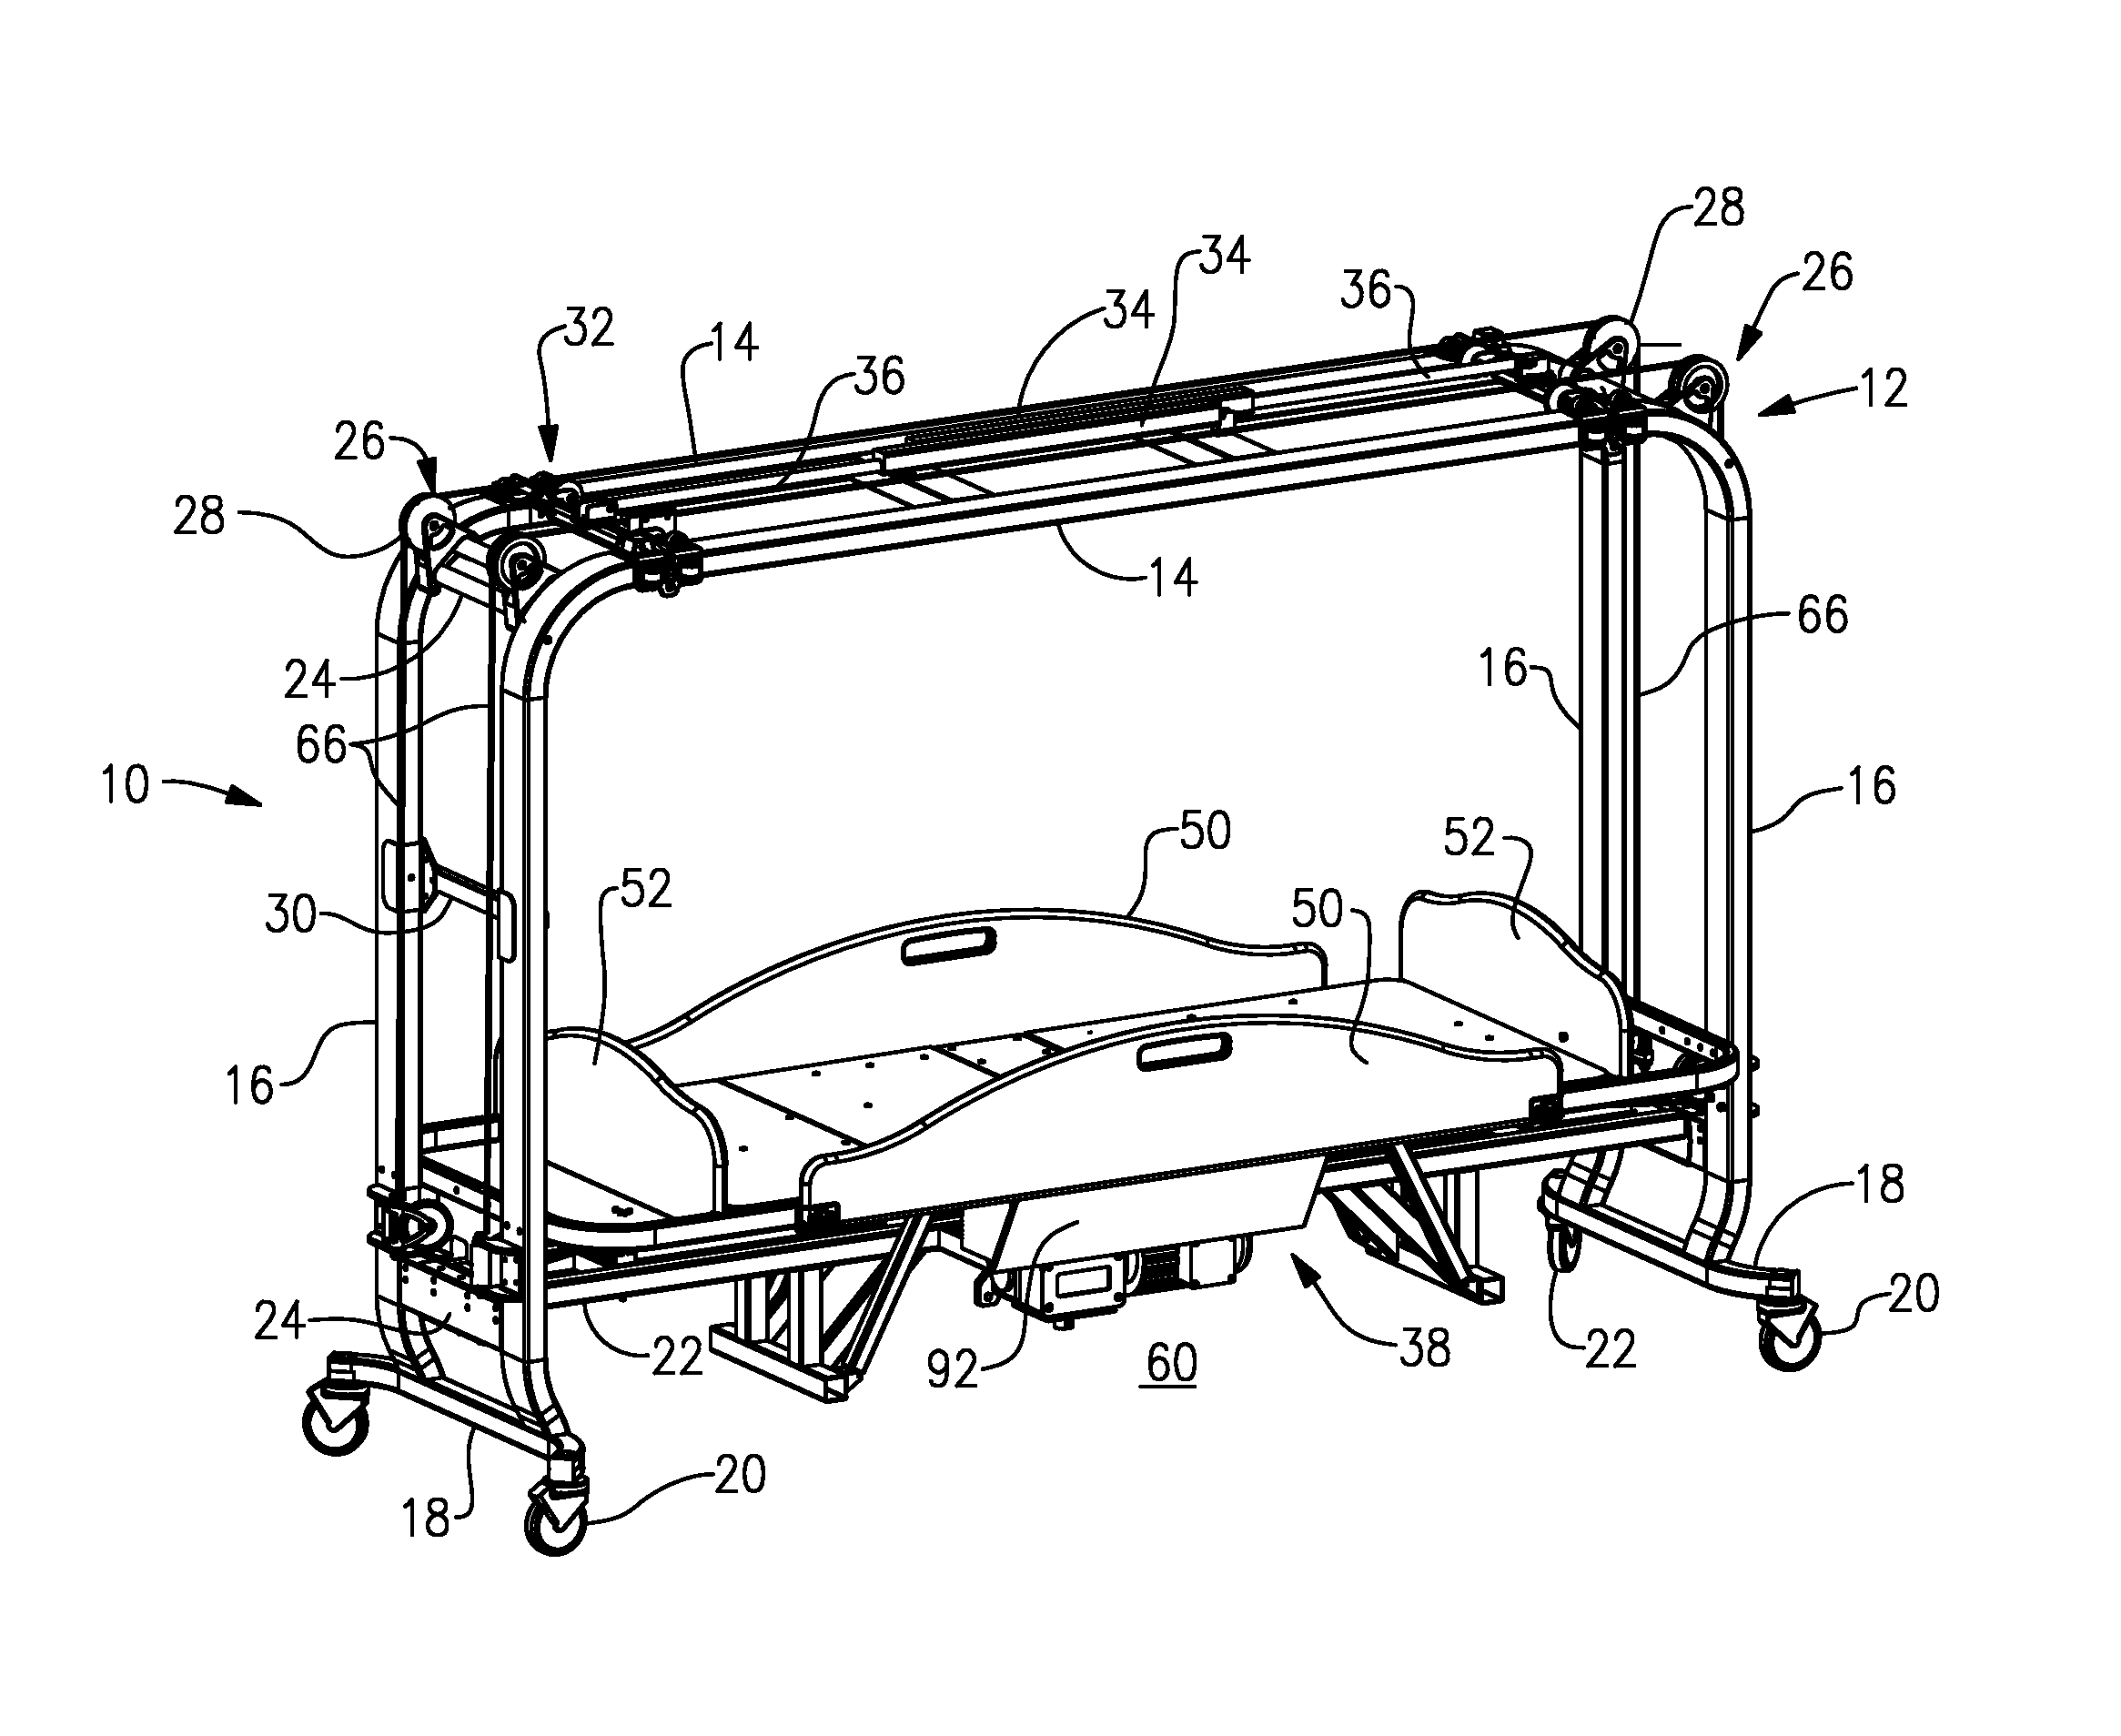 Passive mobility exercise and range-of-motion bed apparatus